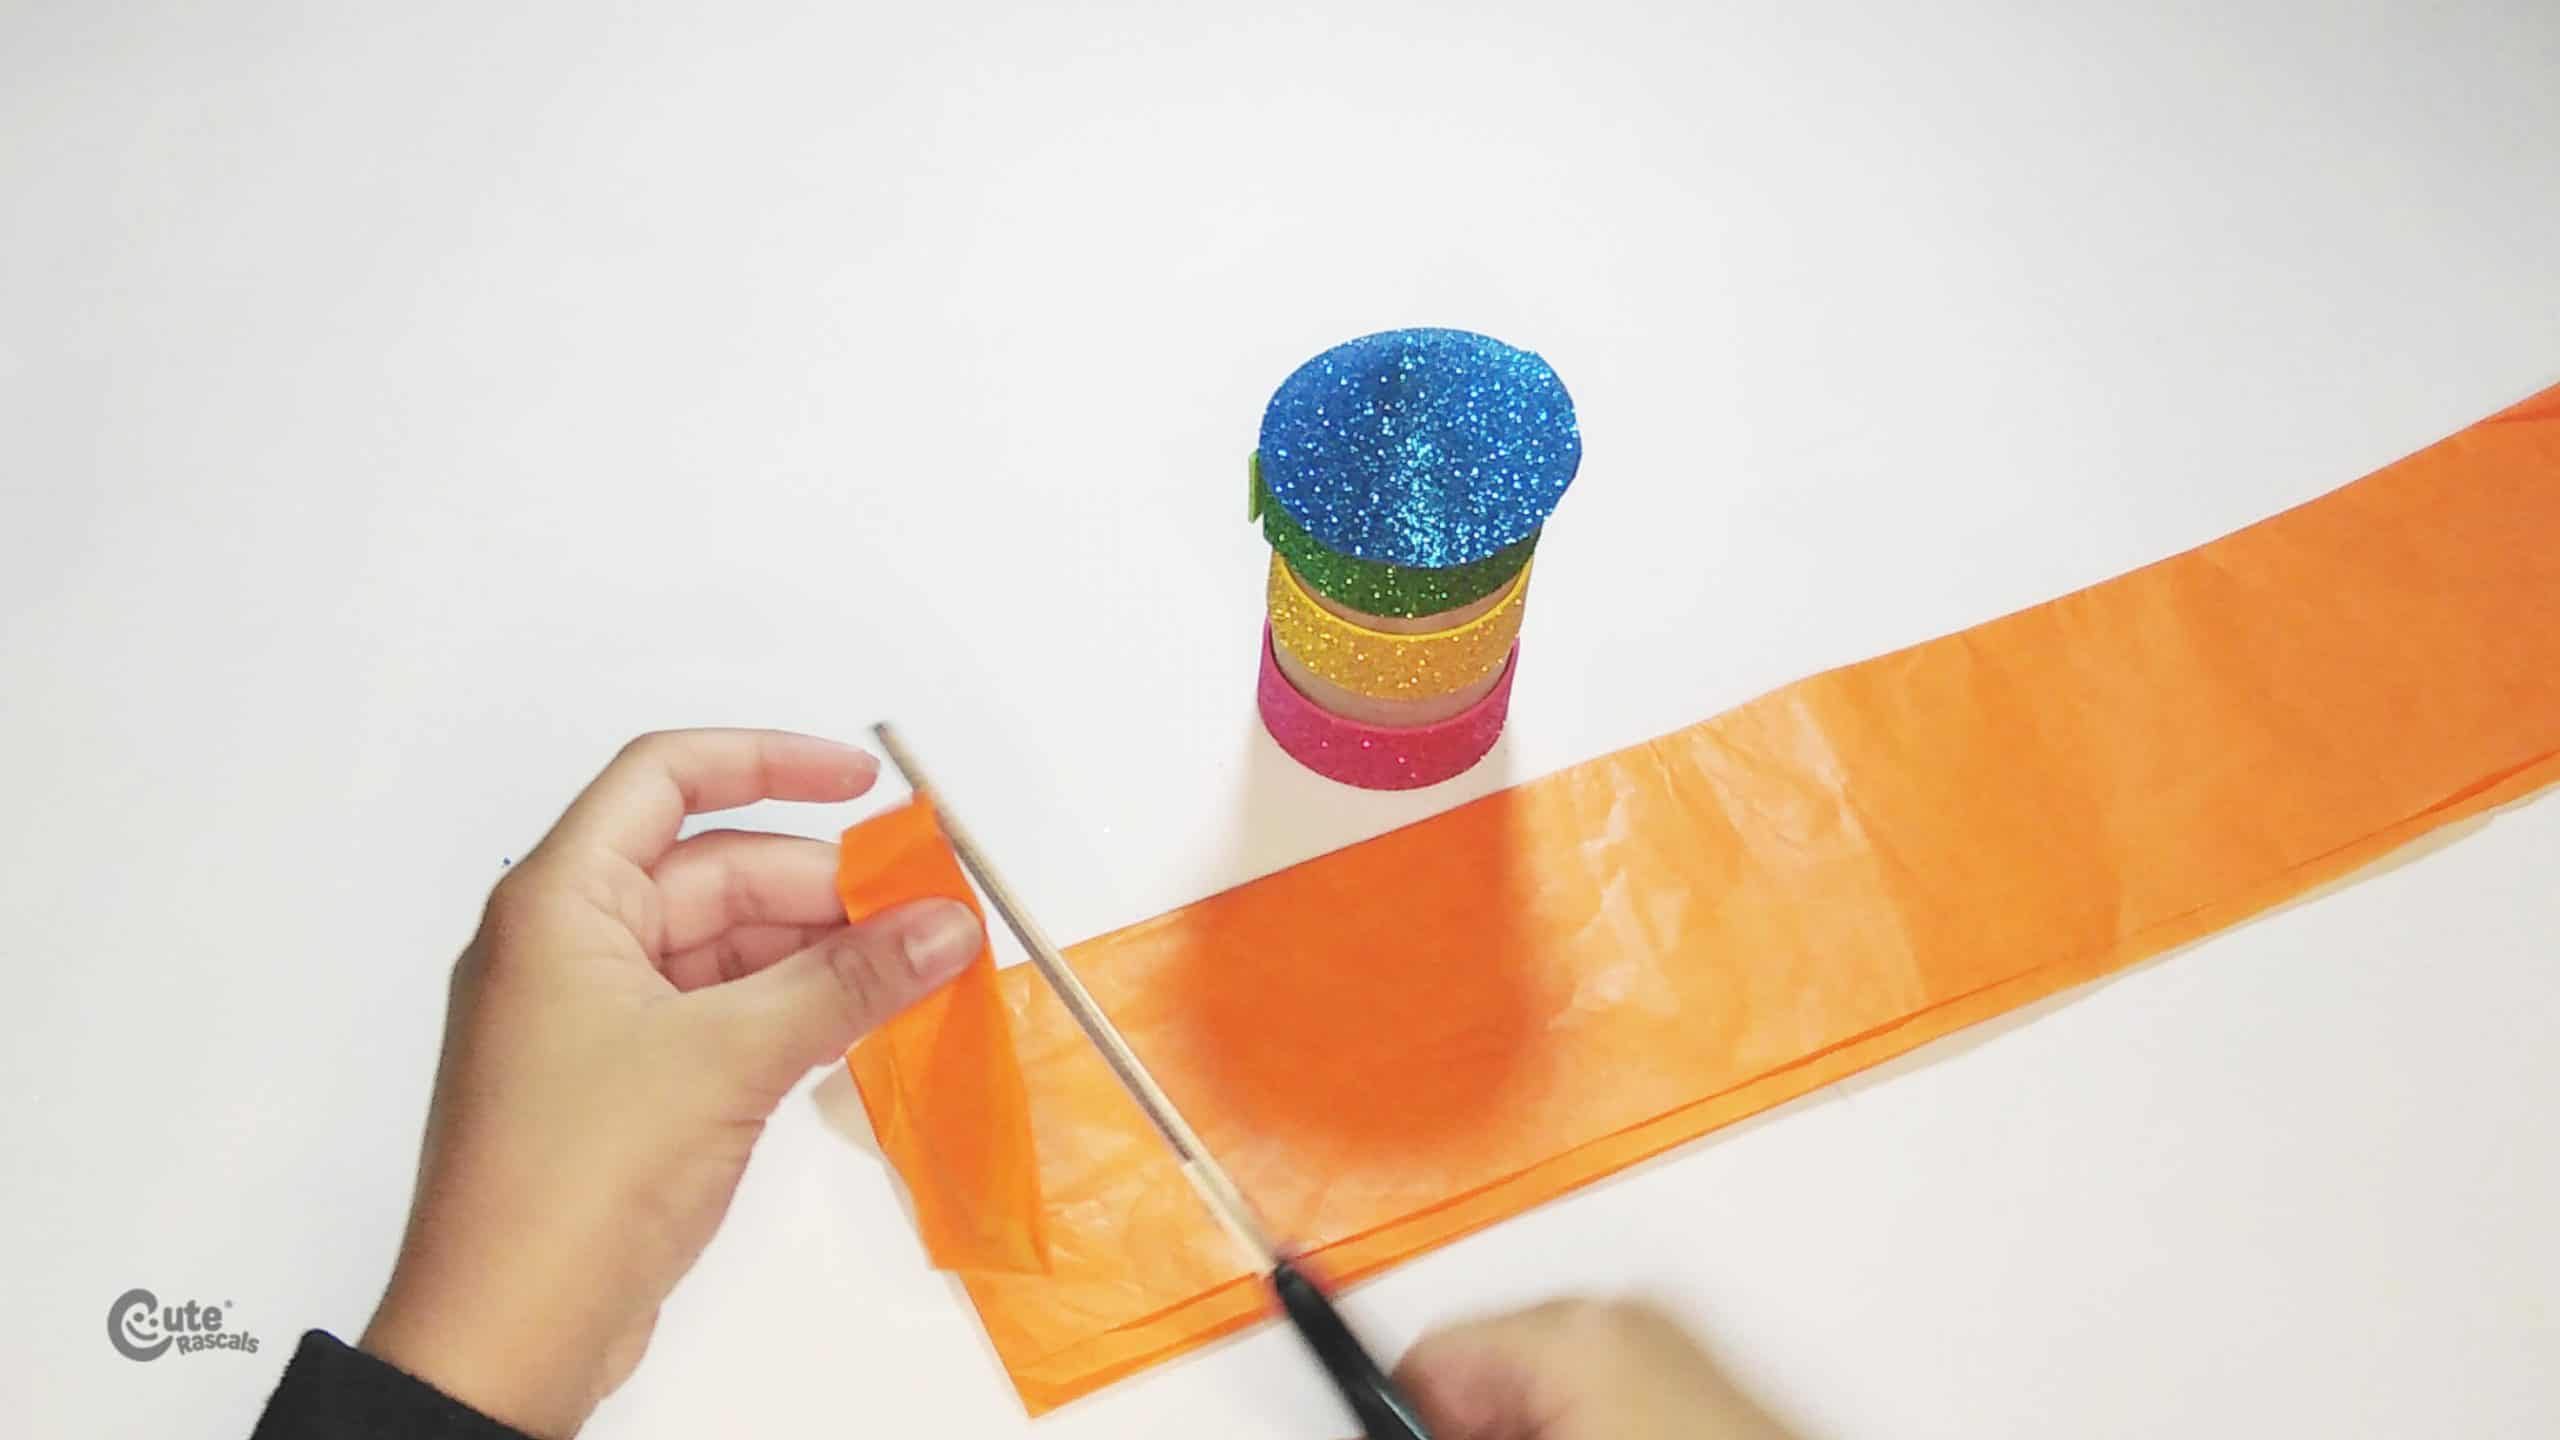 Make some strips with the tissue paper